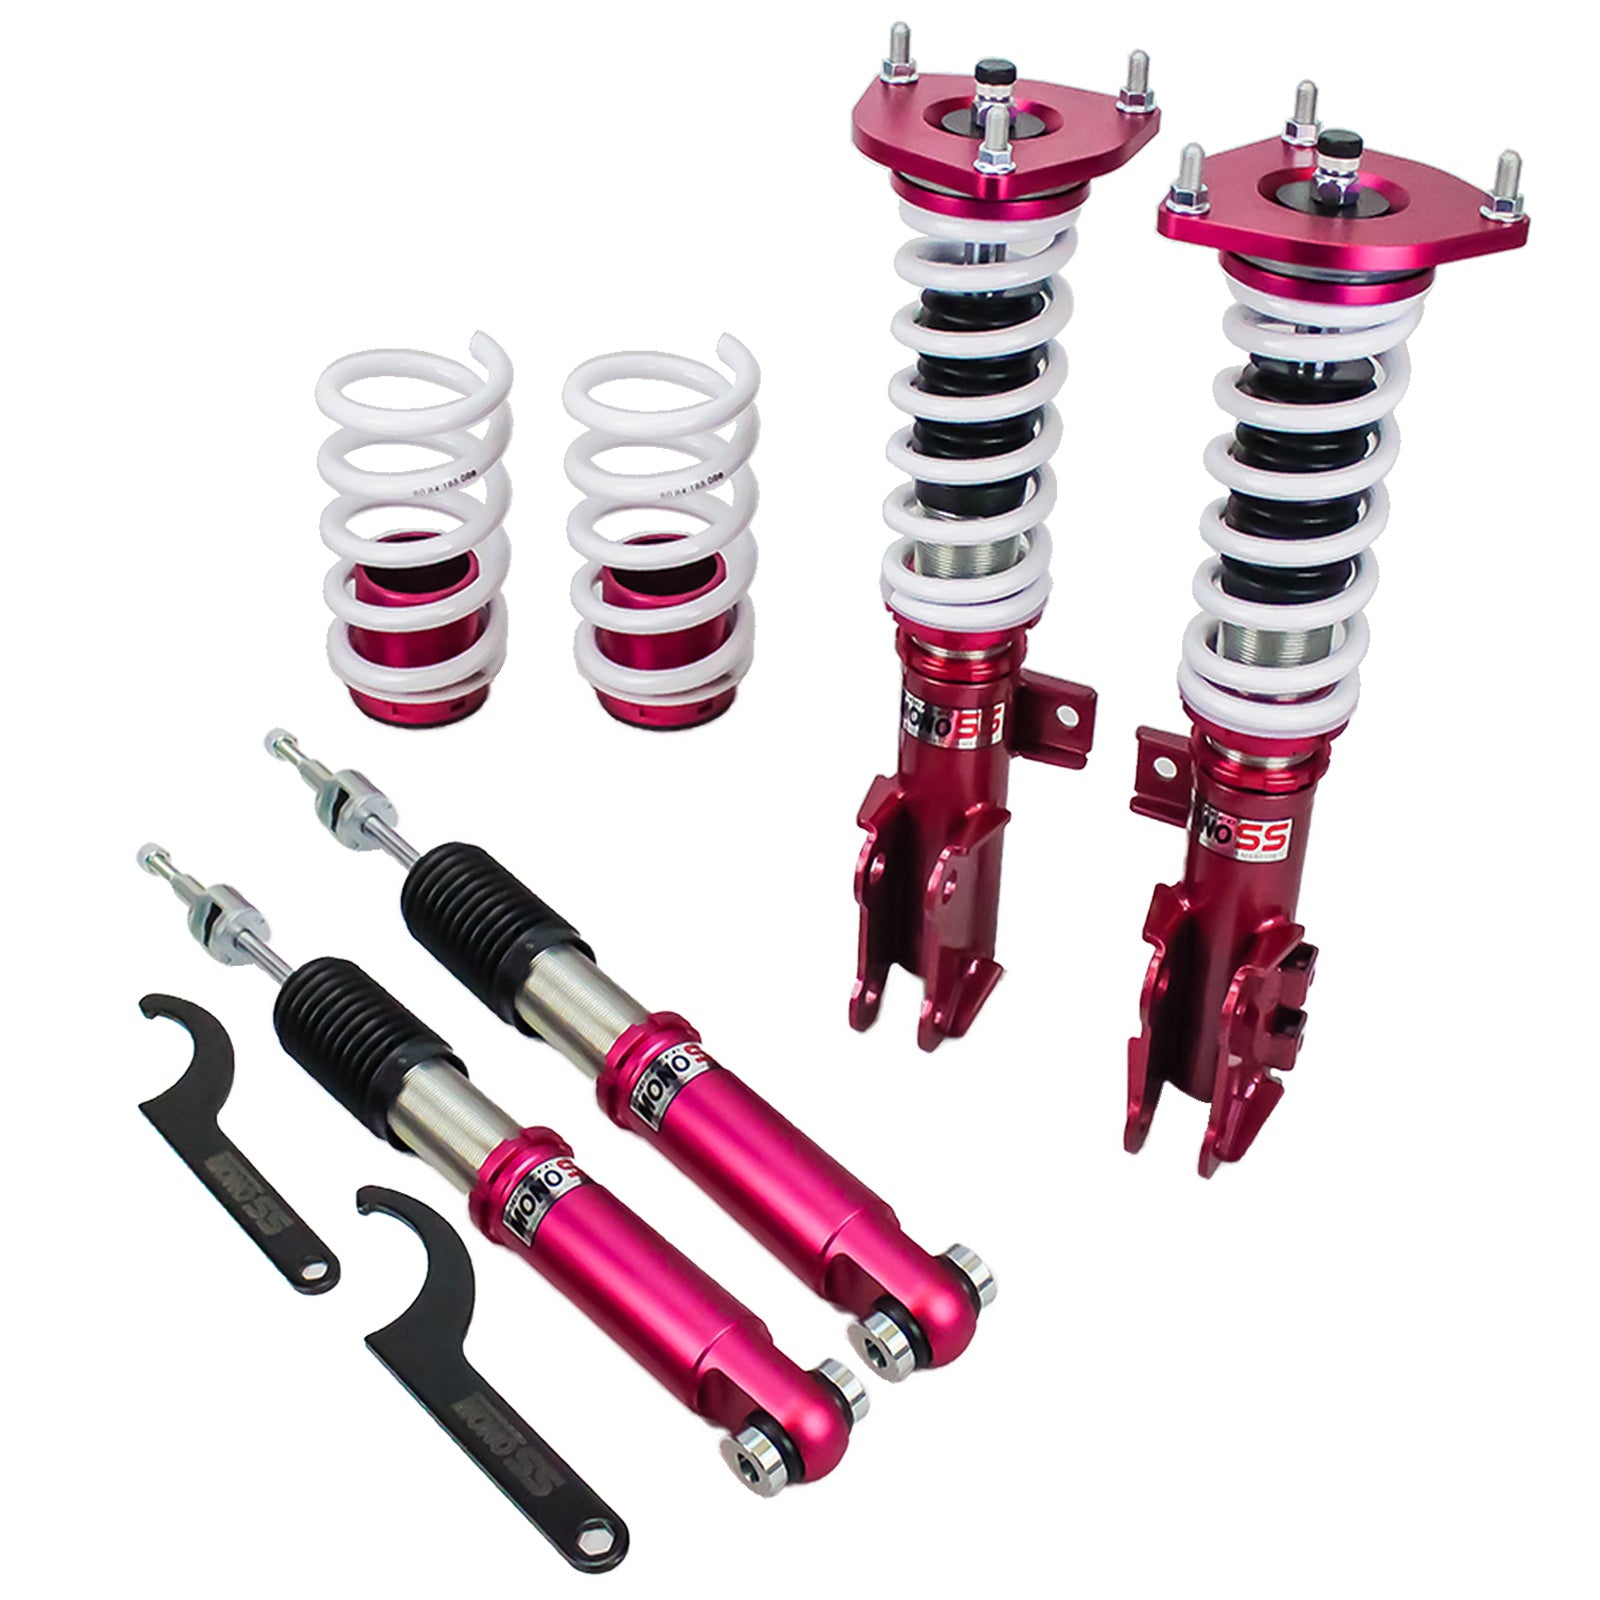 Godspeed MSS0108 MonoSS Coilover Lowering Kit, Fully Adjustable, Ride Height, Spring Tension And 16 Click Damping, Hyundai Tucson 2016+